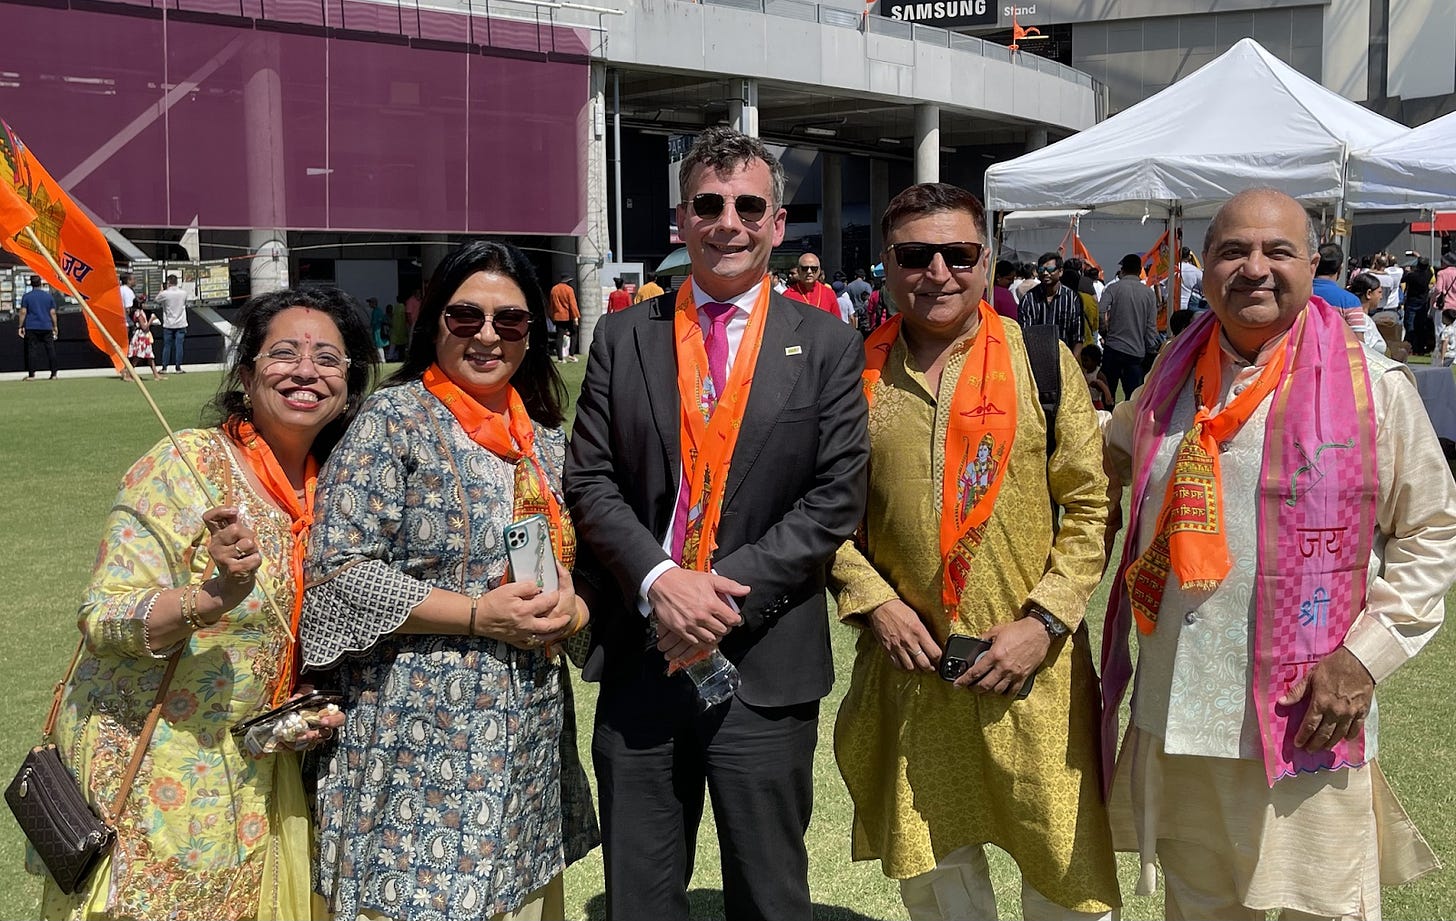 David Seymour with a safron scarf, photographed with four attendees at 'Ayodhya in Eden Park'